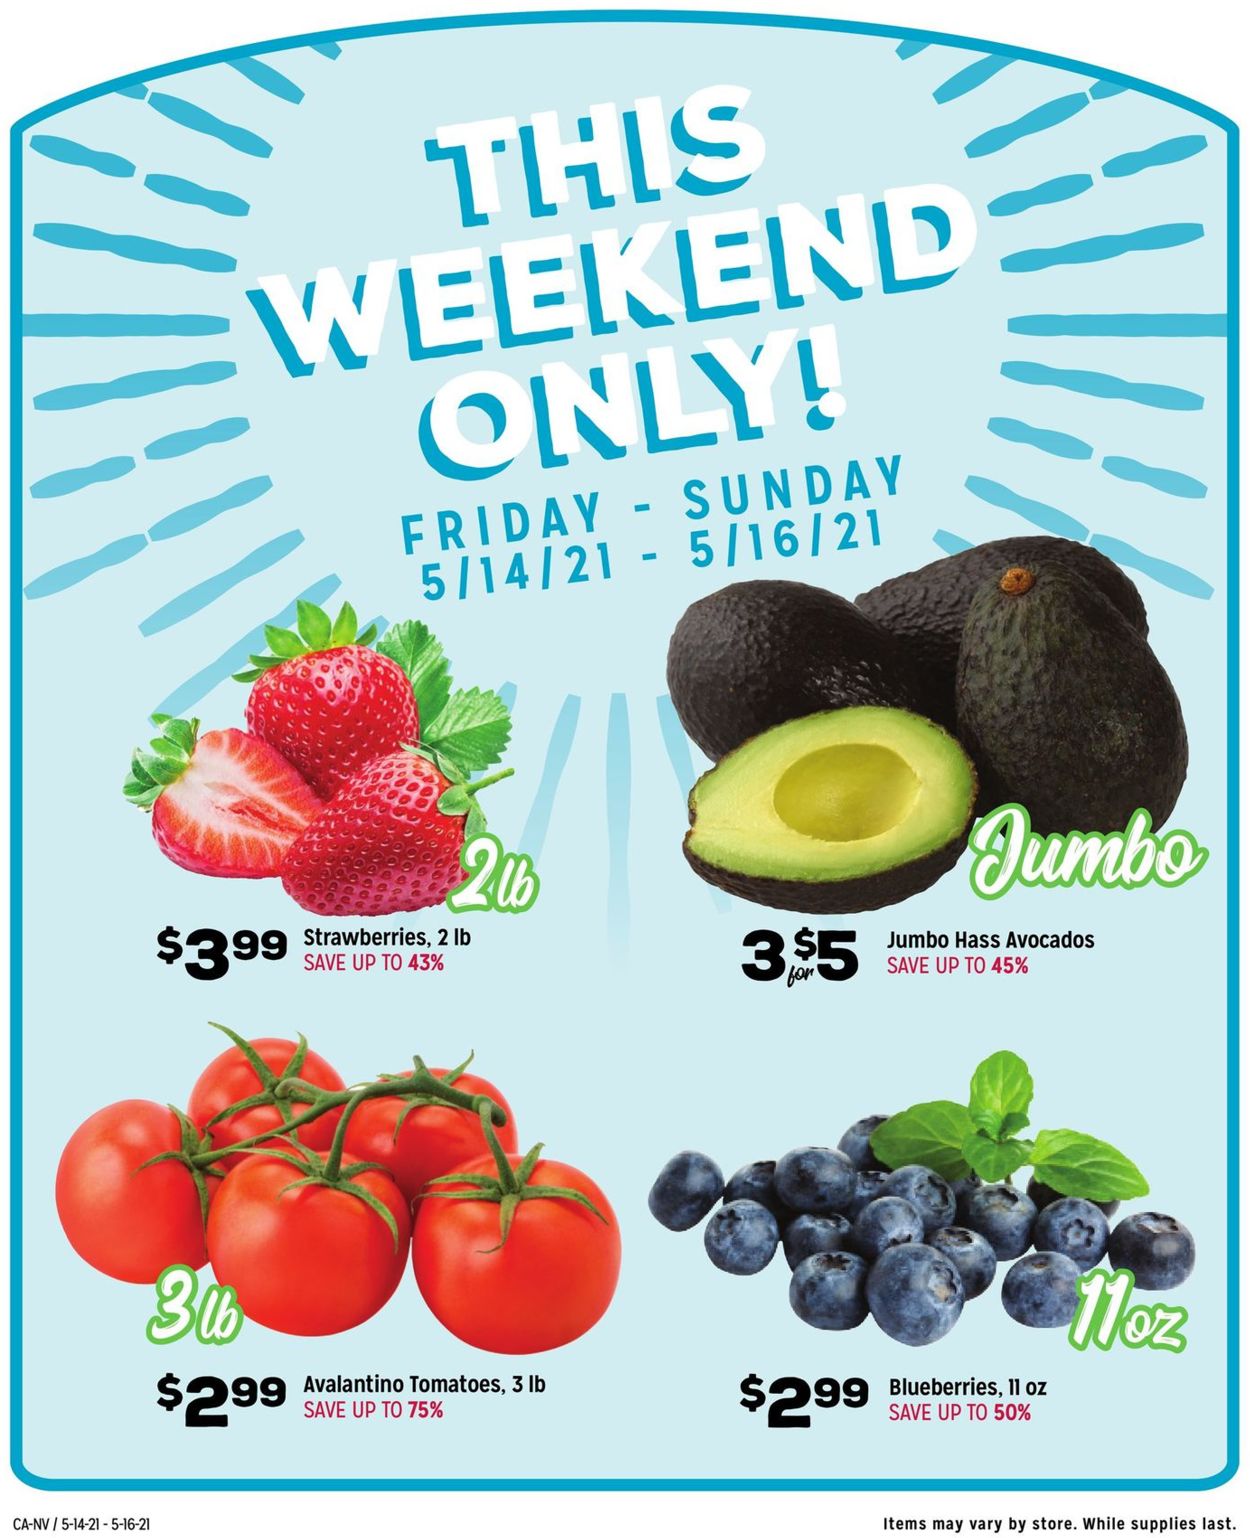 Grocery Outlet Weekly Ad Circular - valid 05/12-05/18/2021